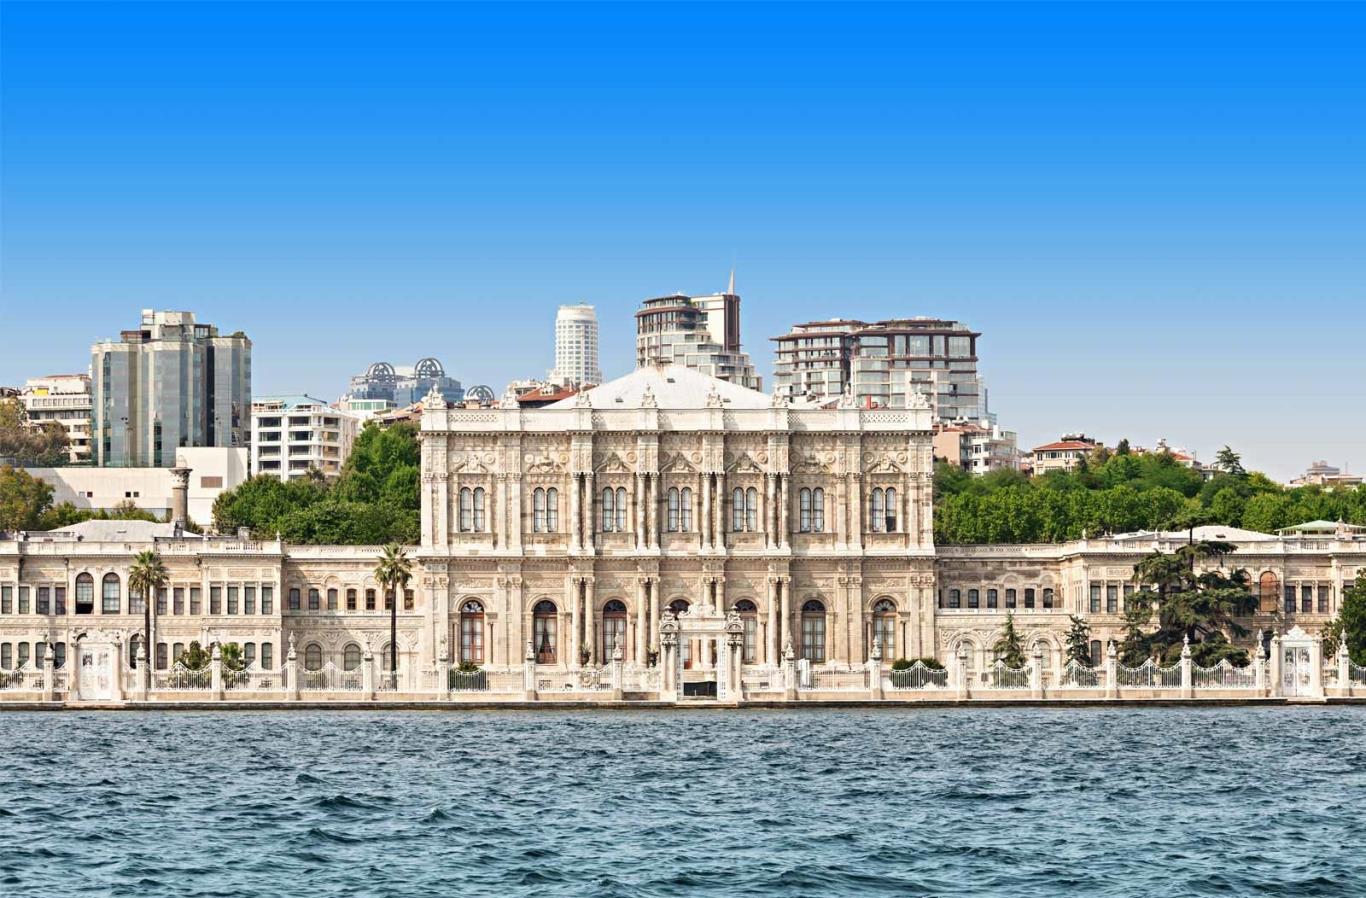 + Cung điện Dolmabahce